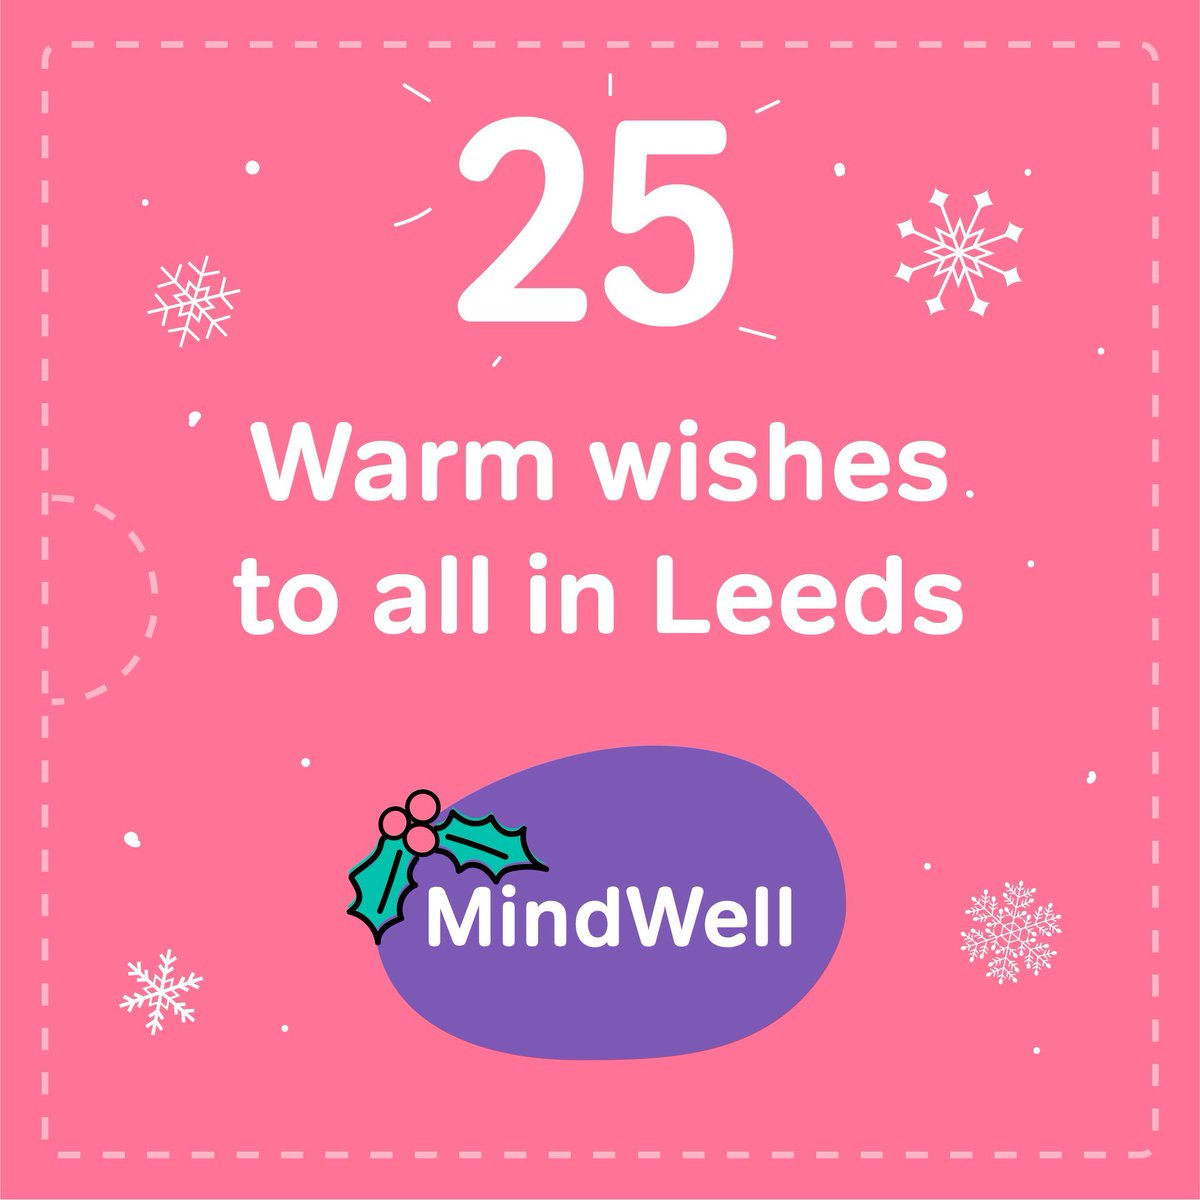 However you’re feeling today, remember our MindWell website has info about services offering support today in #Leeds. Visit our festive toolkit, part of the #MindWellAdventCalendar for tips to look after your #wellbeing. #FestiveSeasonYourWay buff.ly/3t3BrKk